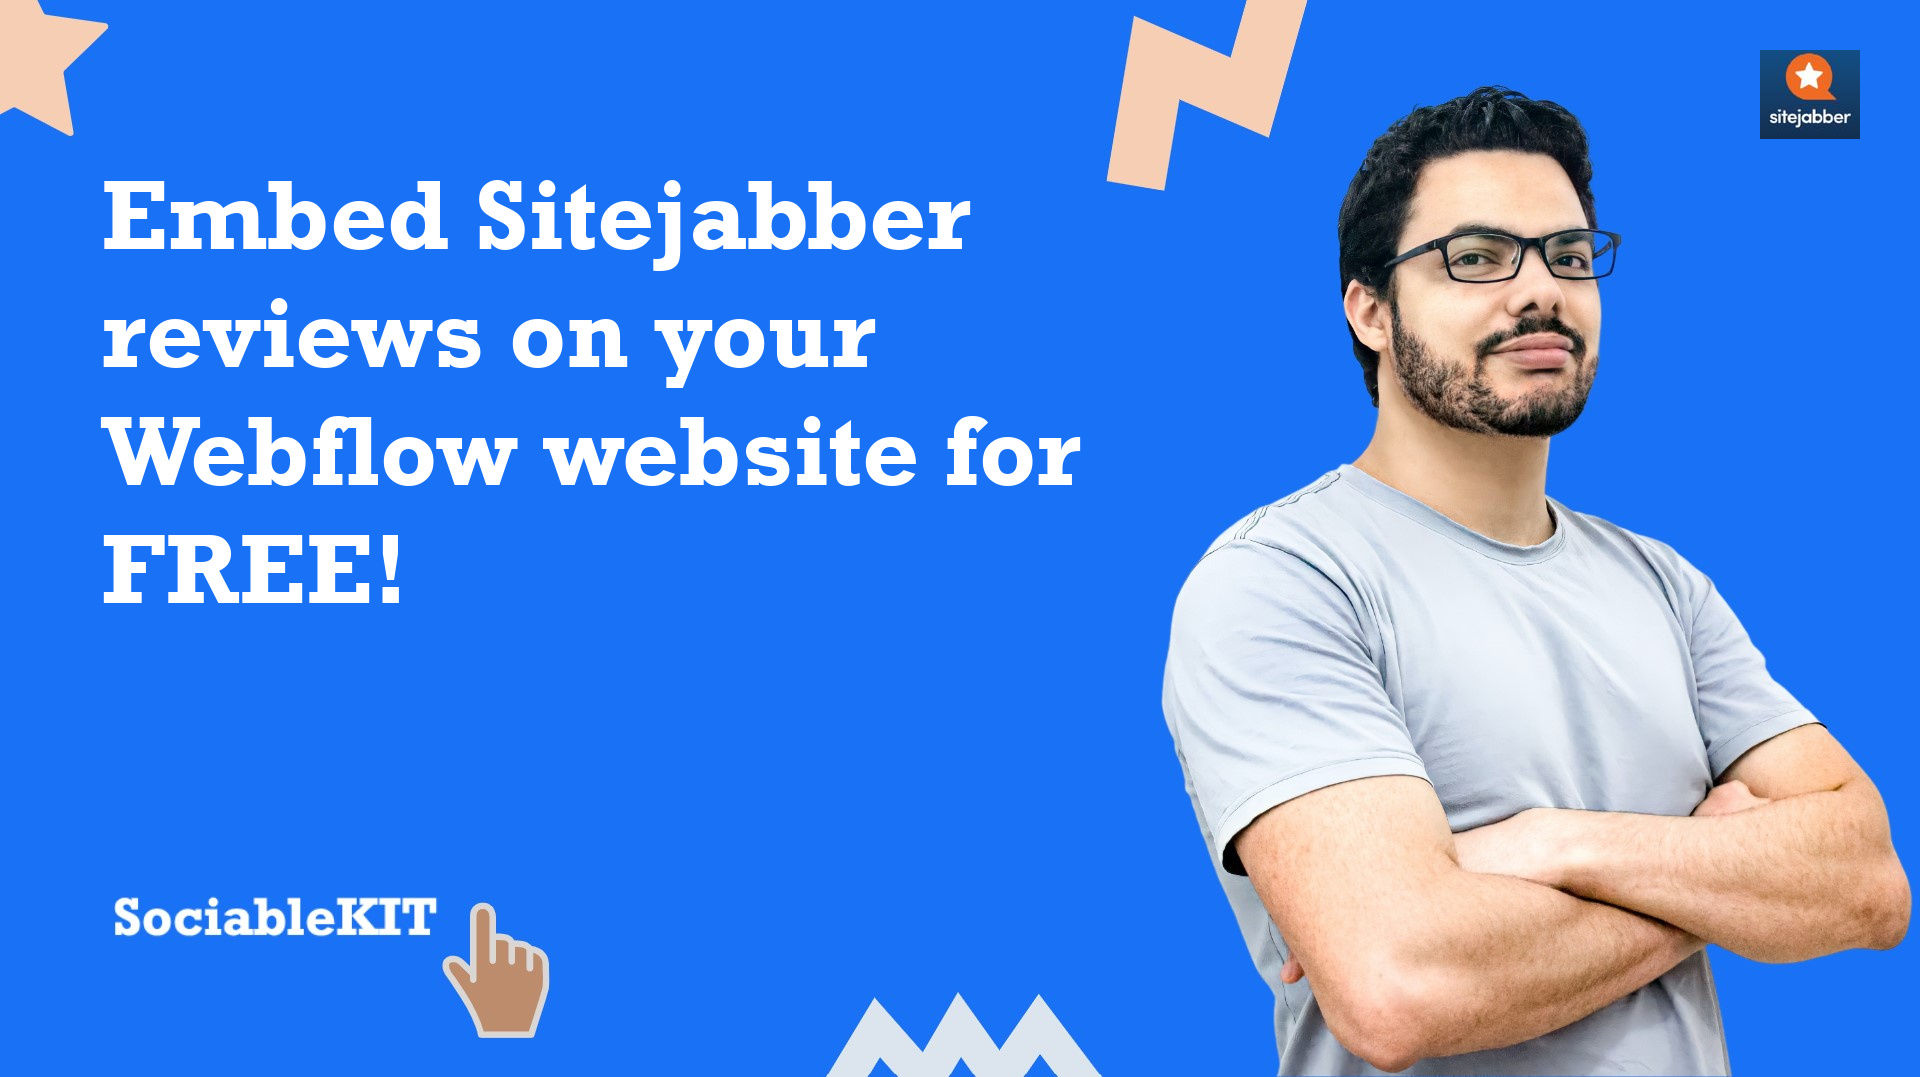 How to embed Sitejabber reviews on your Webflow website for FREE?